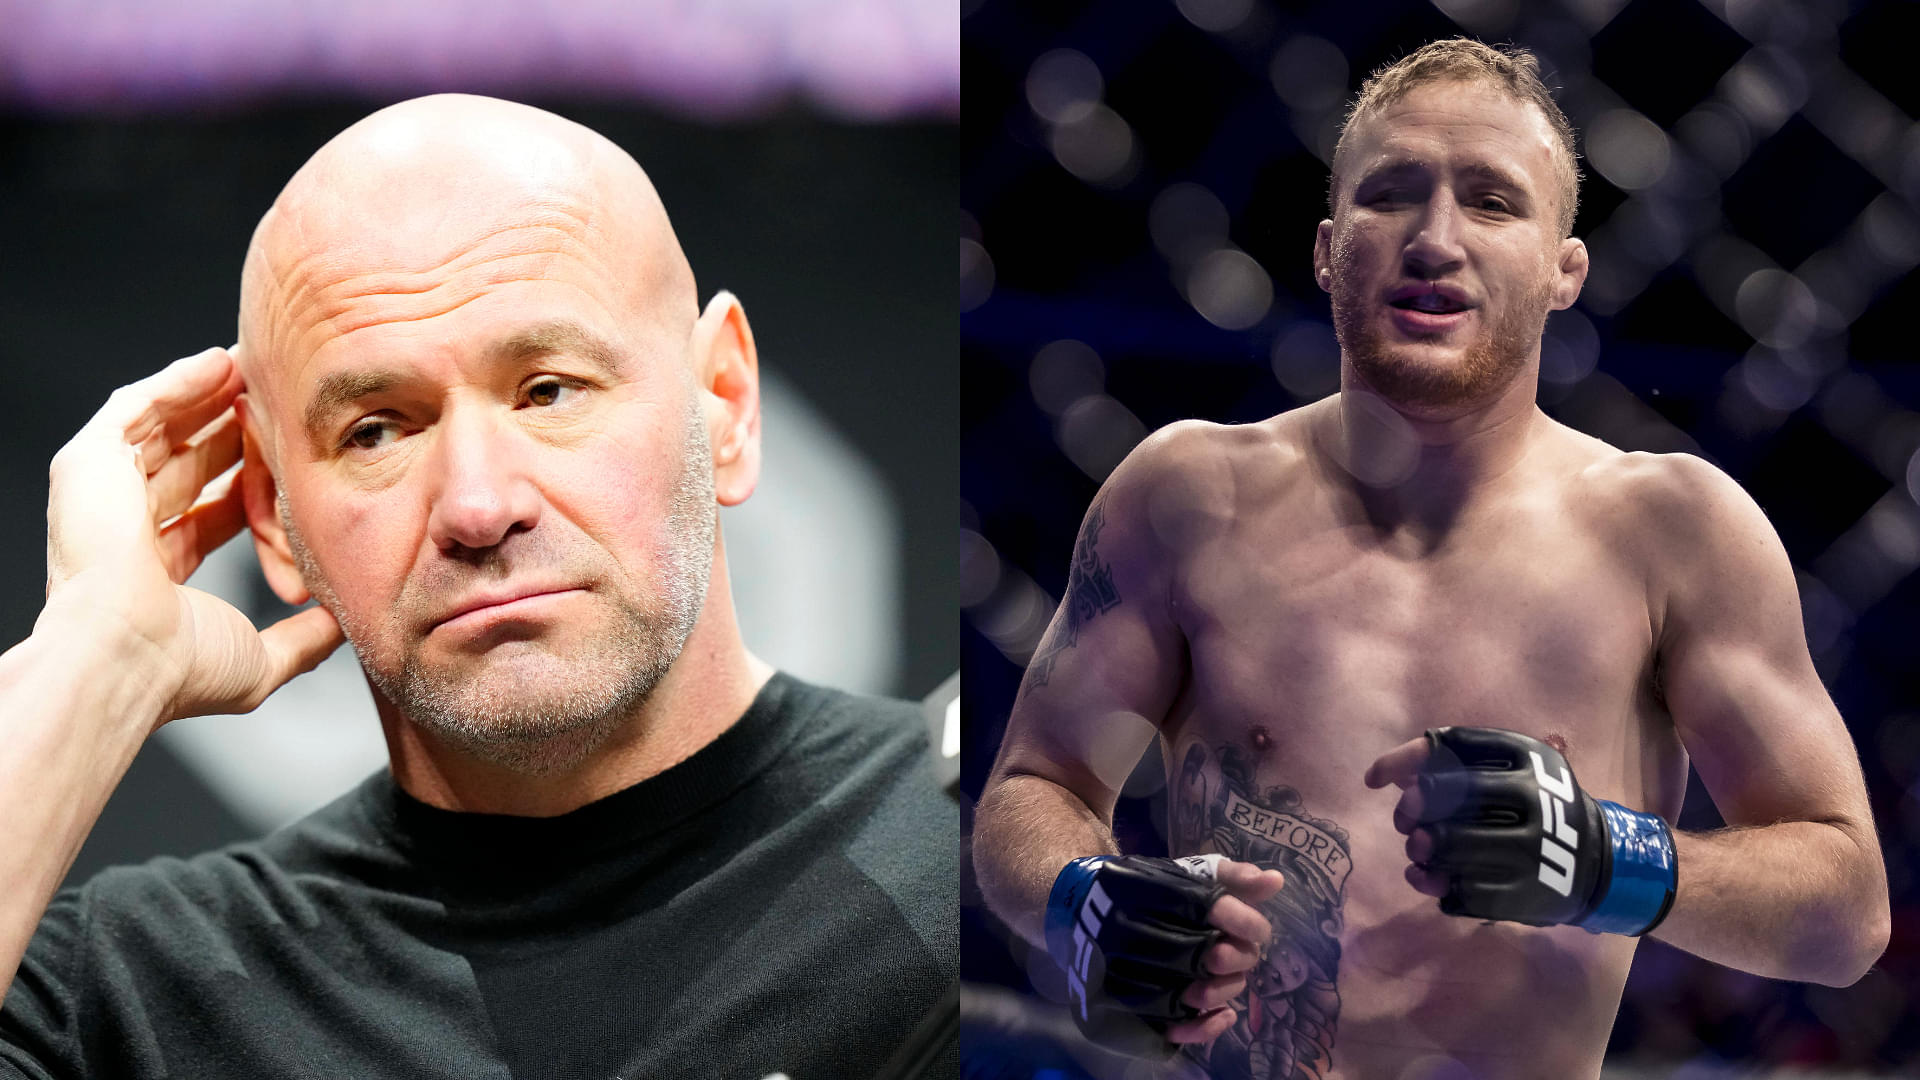 Dana White ‘Oiled-Up’ to Justin Gaethje Without Beard- Here Are Top 5 UFC Memes This Week